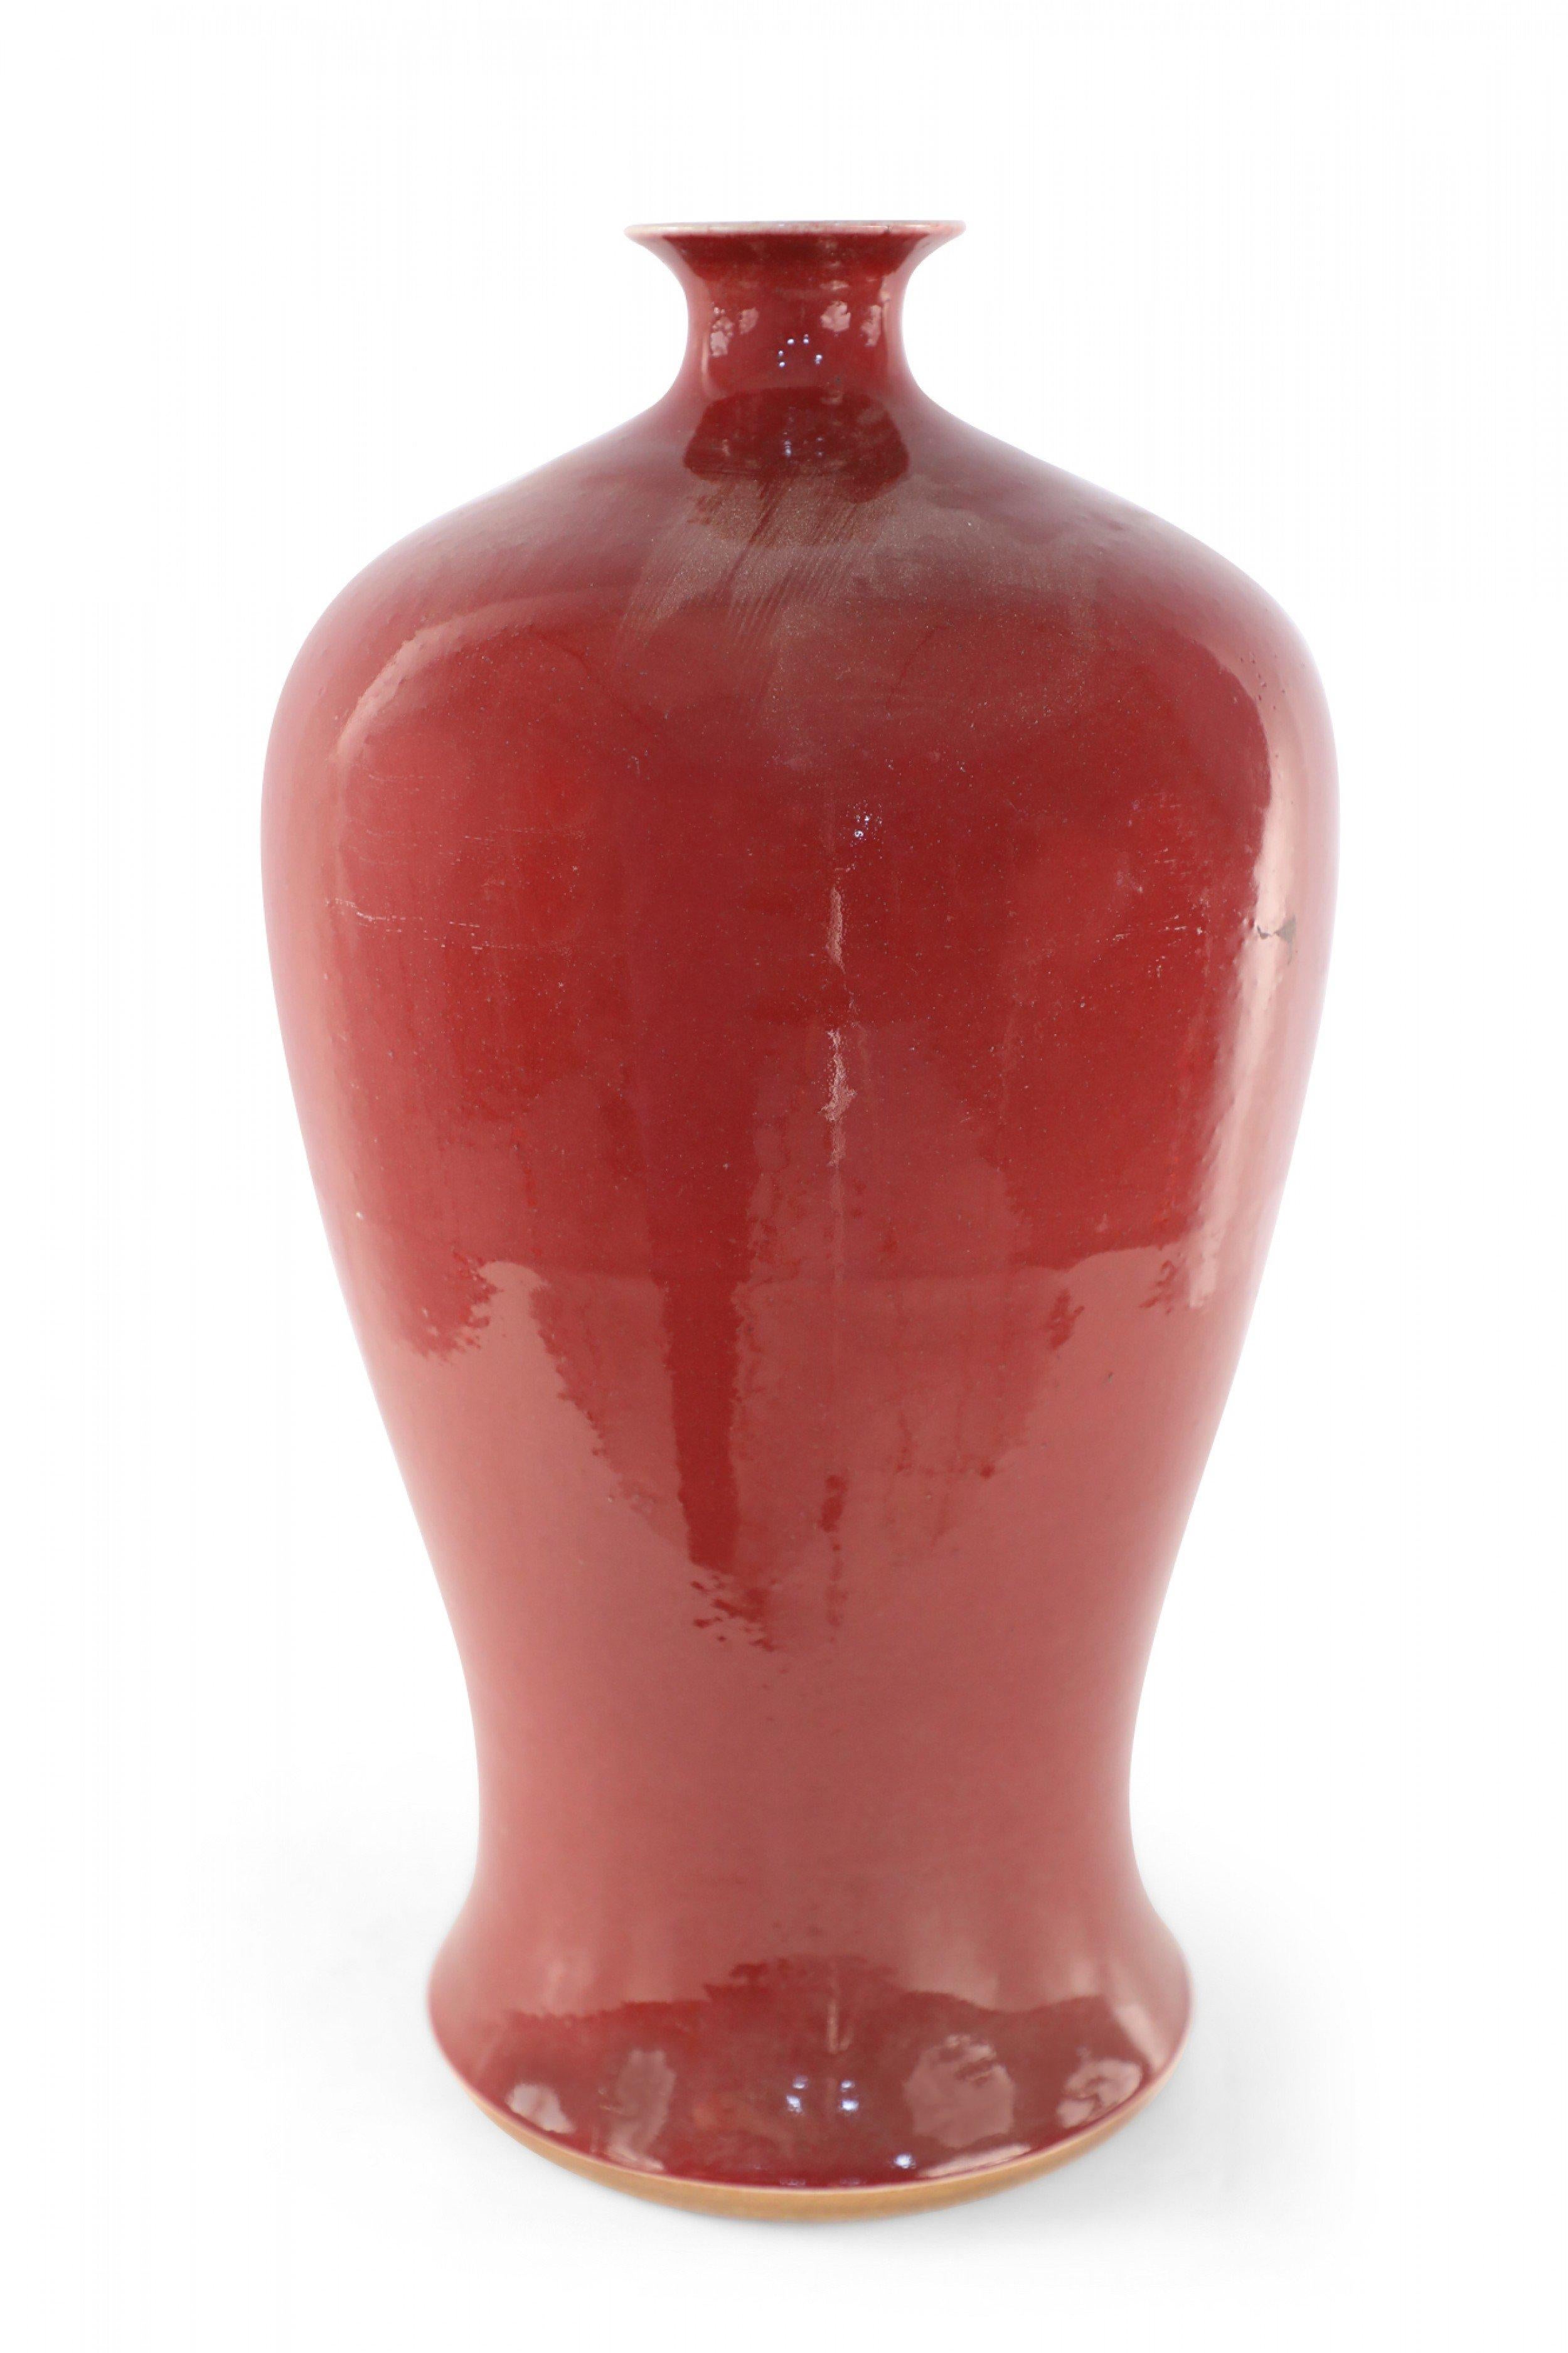 Chinese porcelain Meiping vase with a robust pomegranate red glaze.